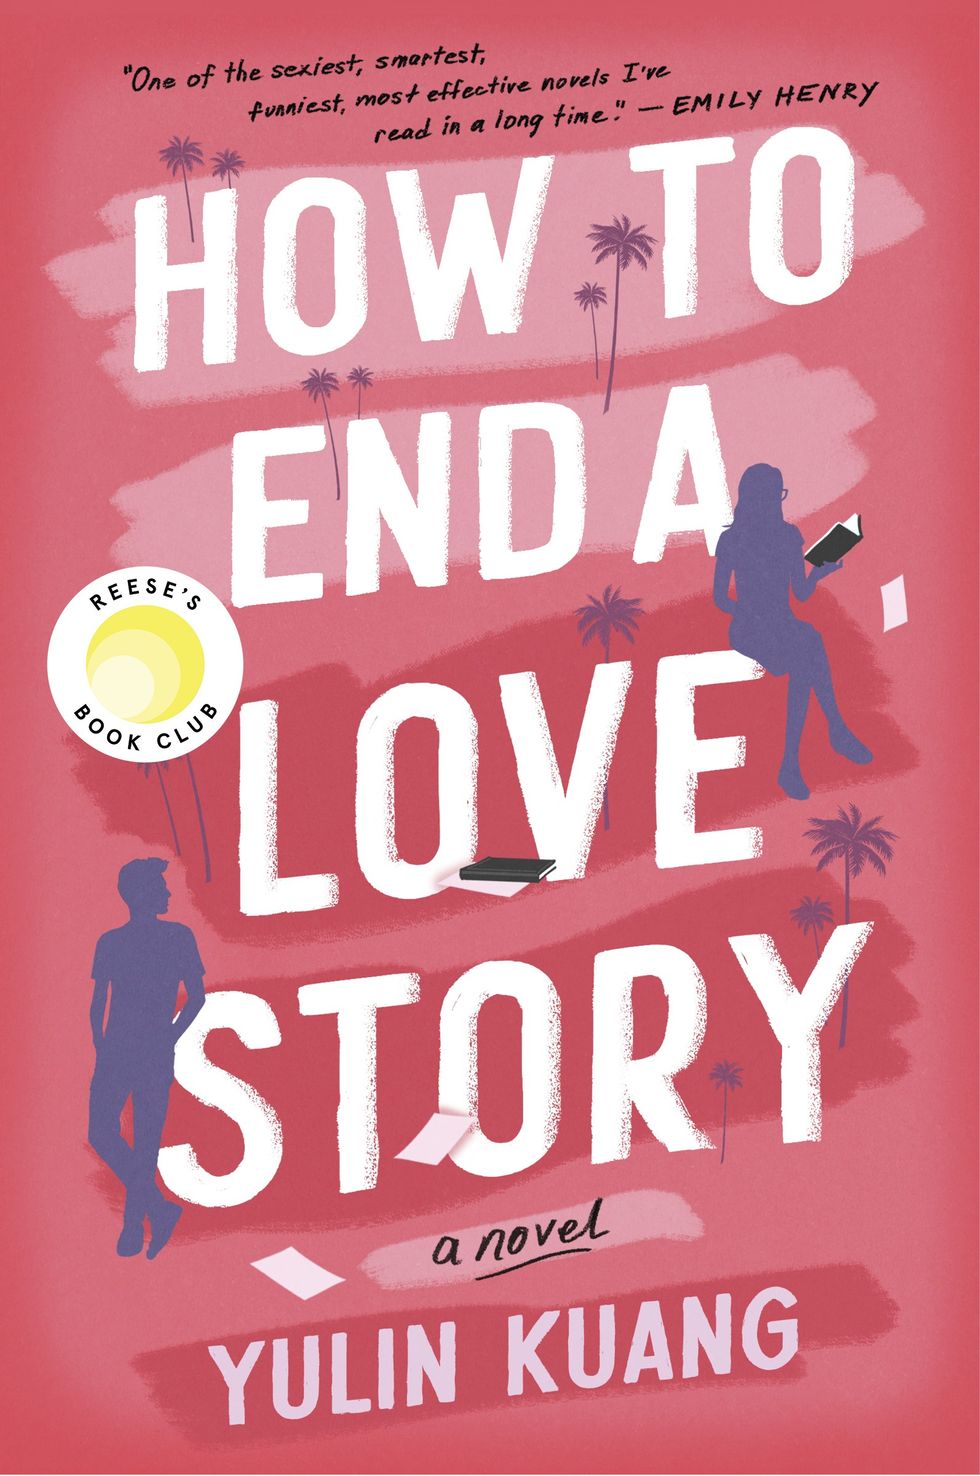 yulin kuang's how to end a love story